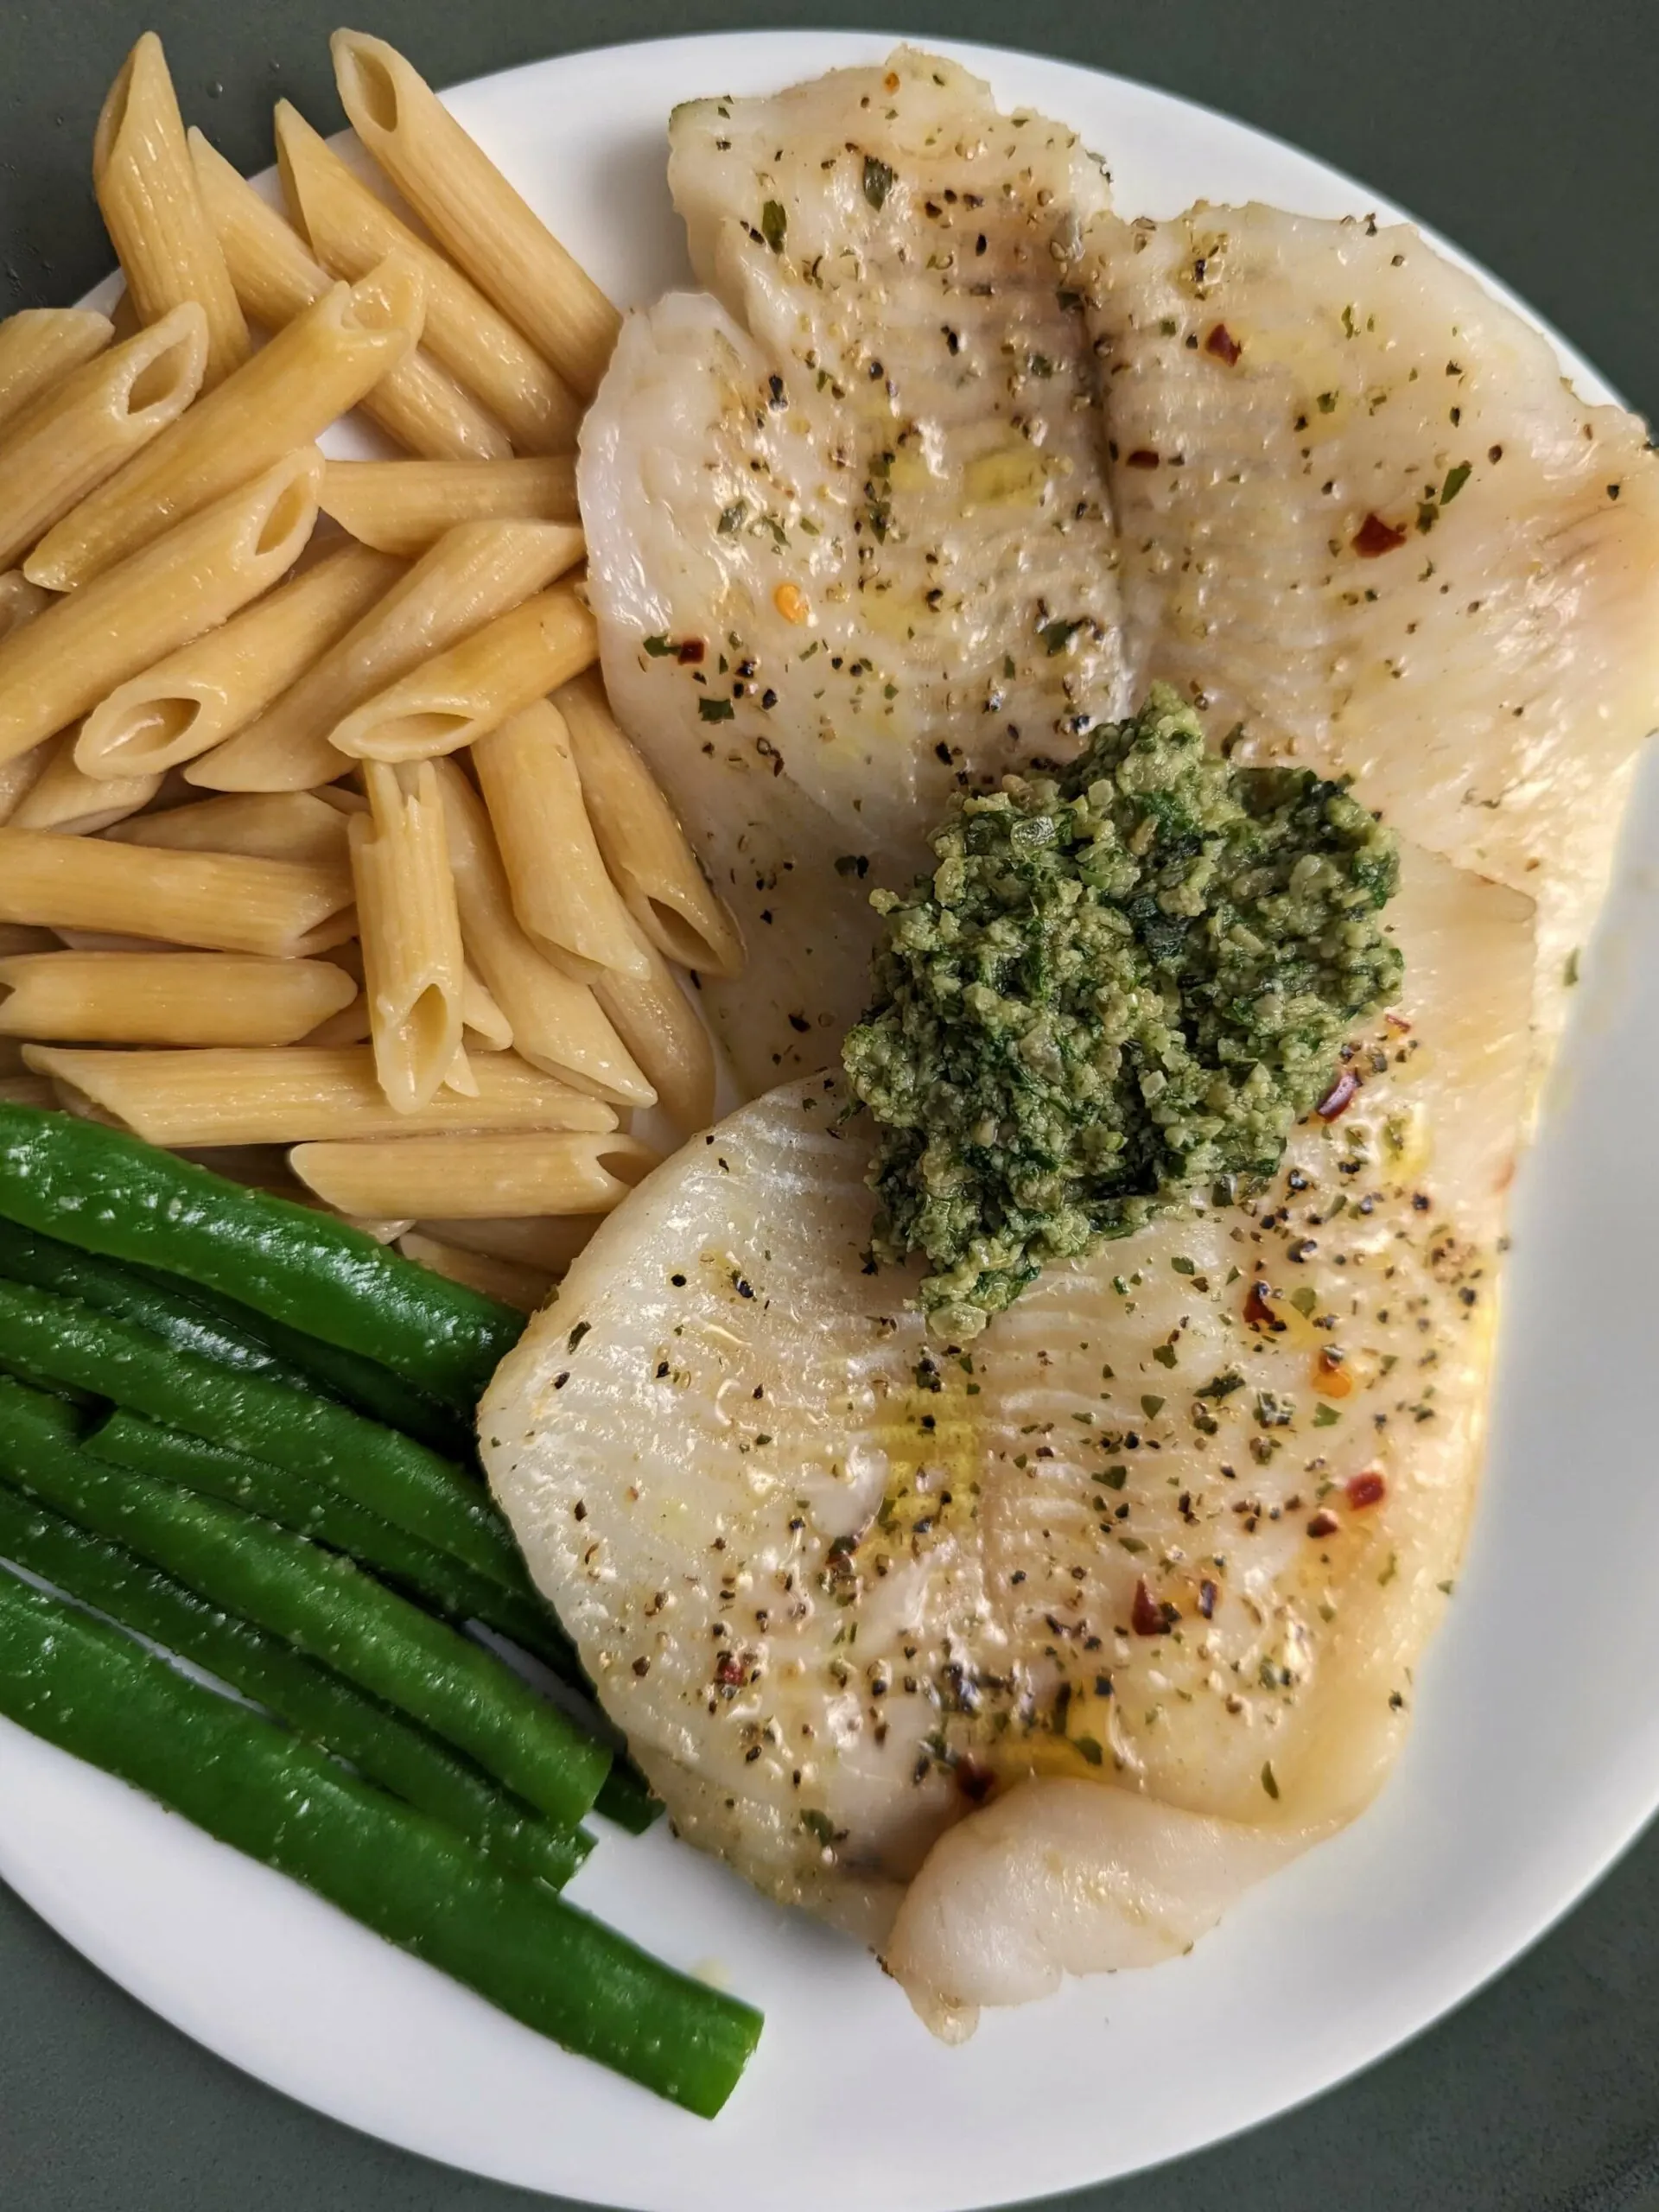 Our baked flounder topped with homemade pesto and served on a plate pasta and green beans.